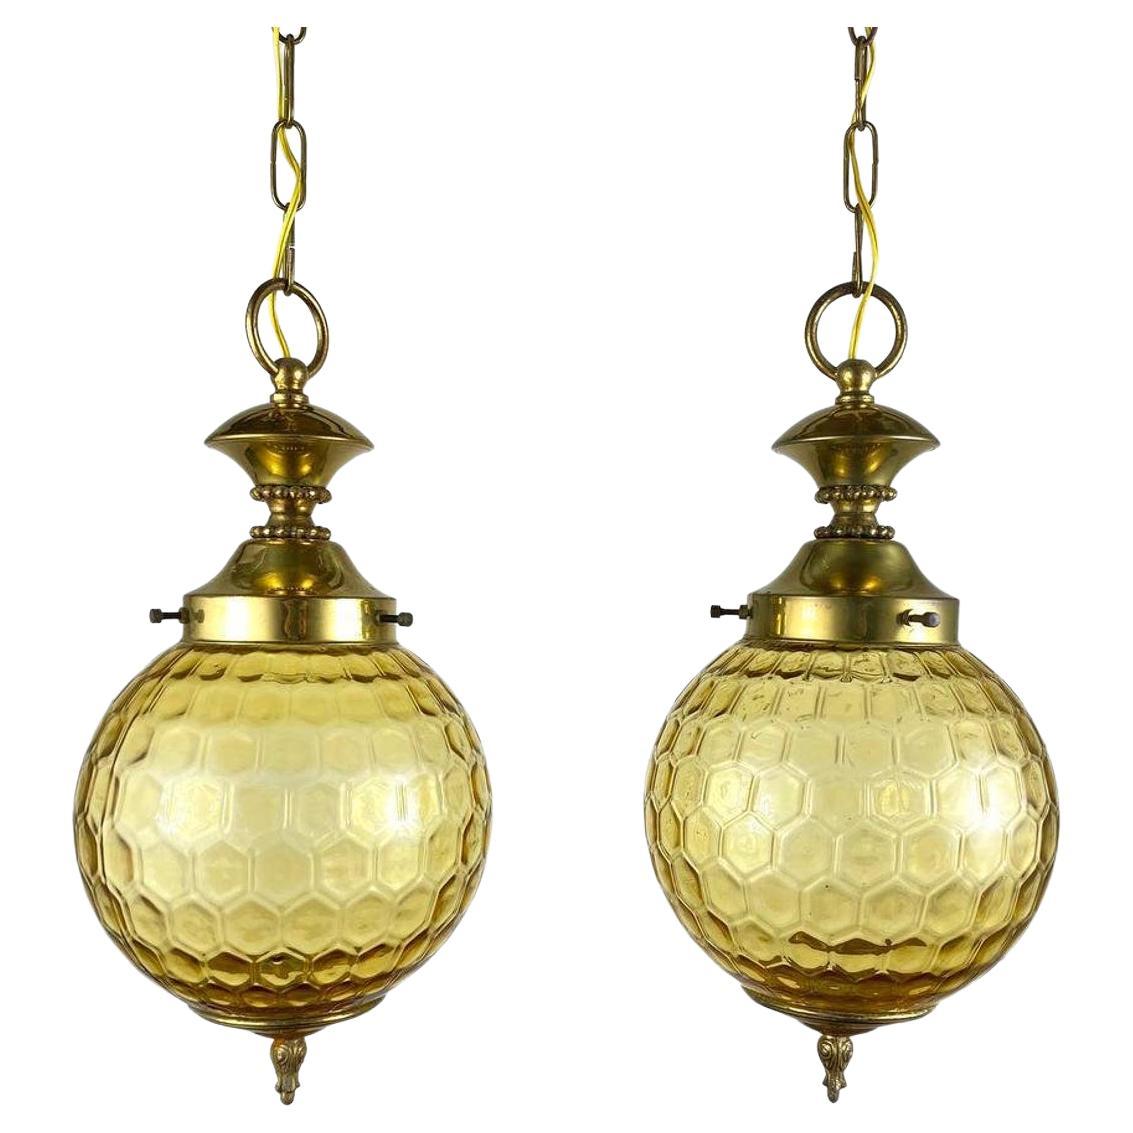 Vintage Ceiling Lamp or Lantern Gilt Brass and Textured Glass Suspention For Sale